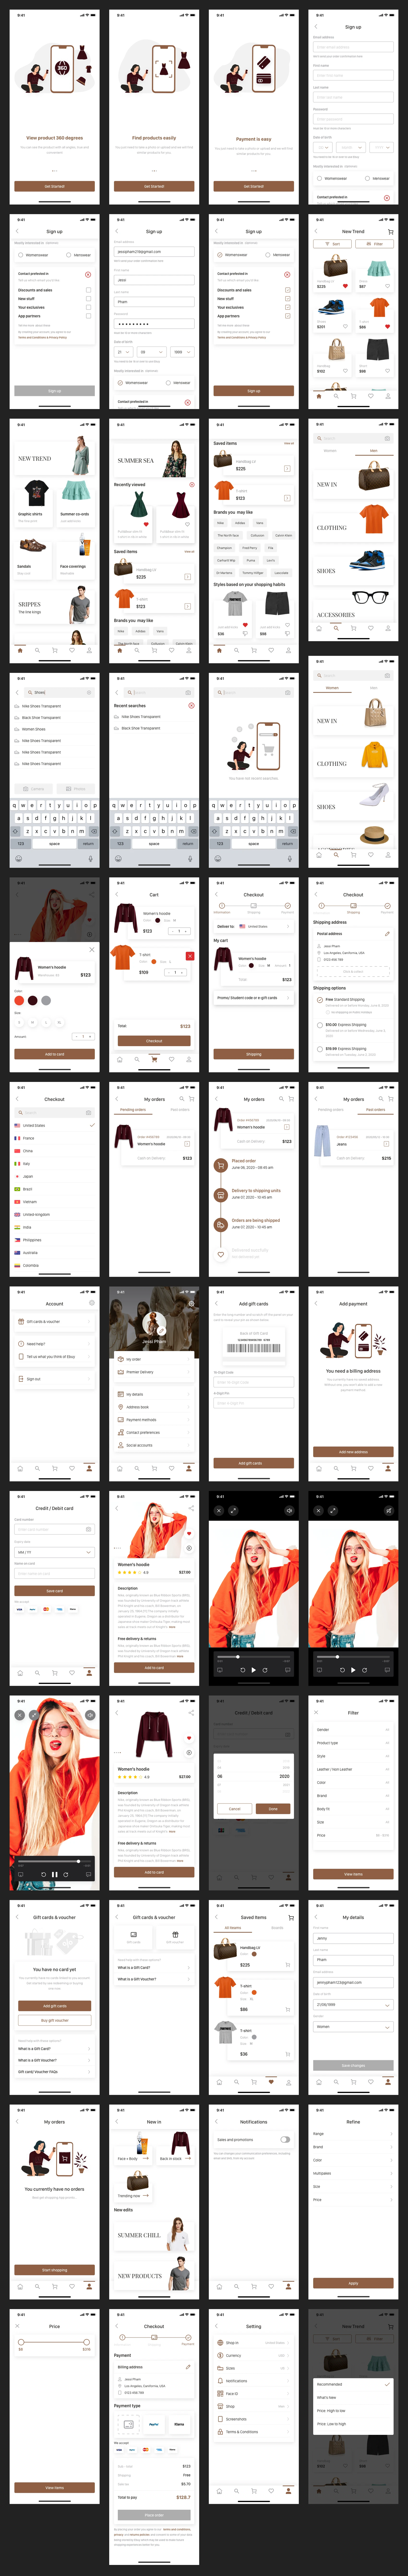 Ebuy Free eCommerce UI Kit for Sketch - Ebuy is an online shopping app that allows customers to directly purchase products or services from sellers online. Users can search for the desired product by taking or uploading similar photos. Ebuy’s interface is designed to be familiar to users. This app provides 360 degree products view and introduction videos. Users can also customize their profile to suit their interest, needs or their buying behavior.